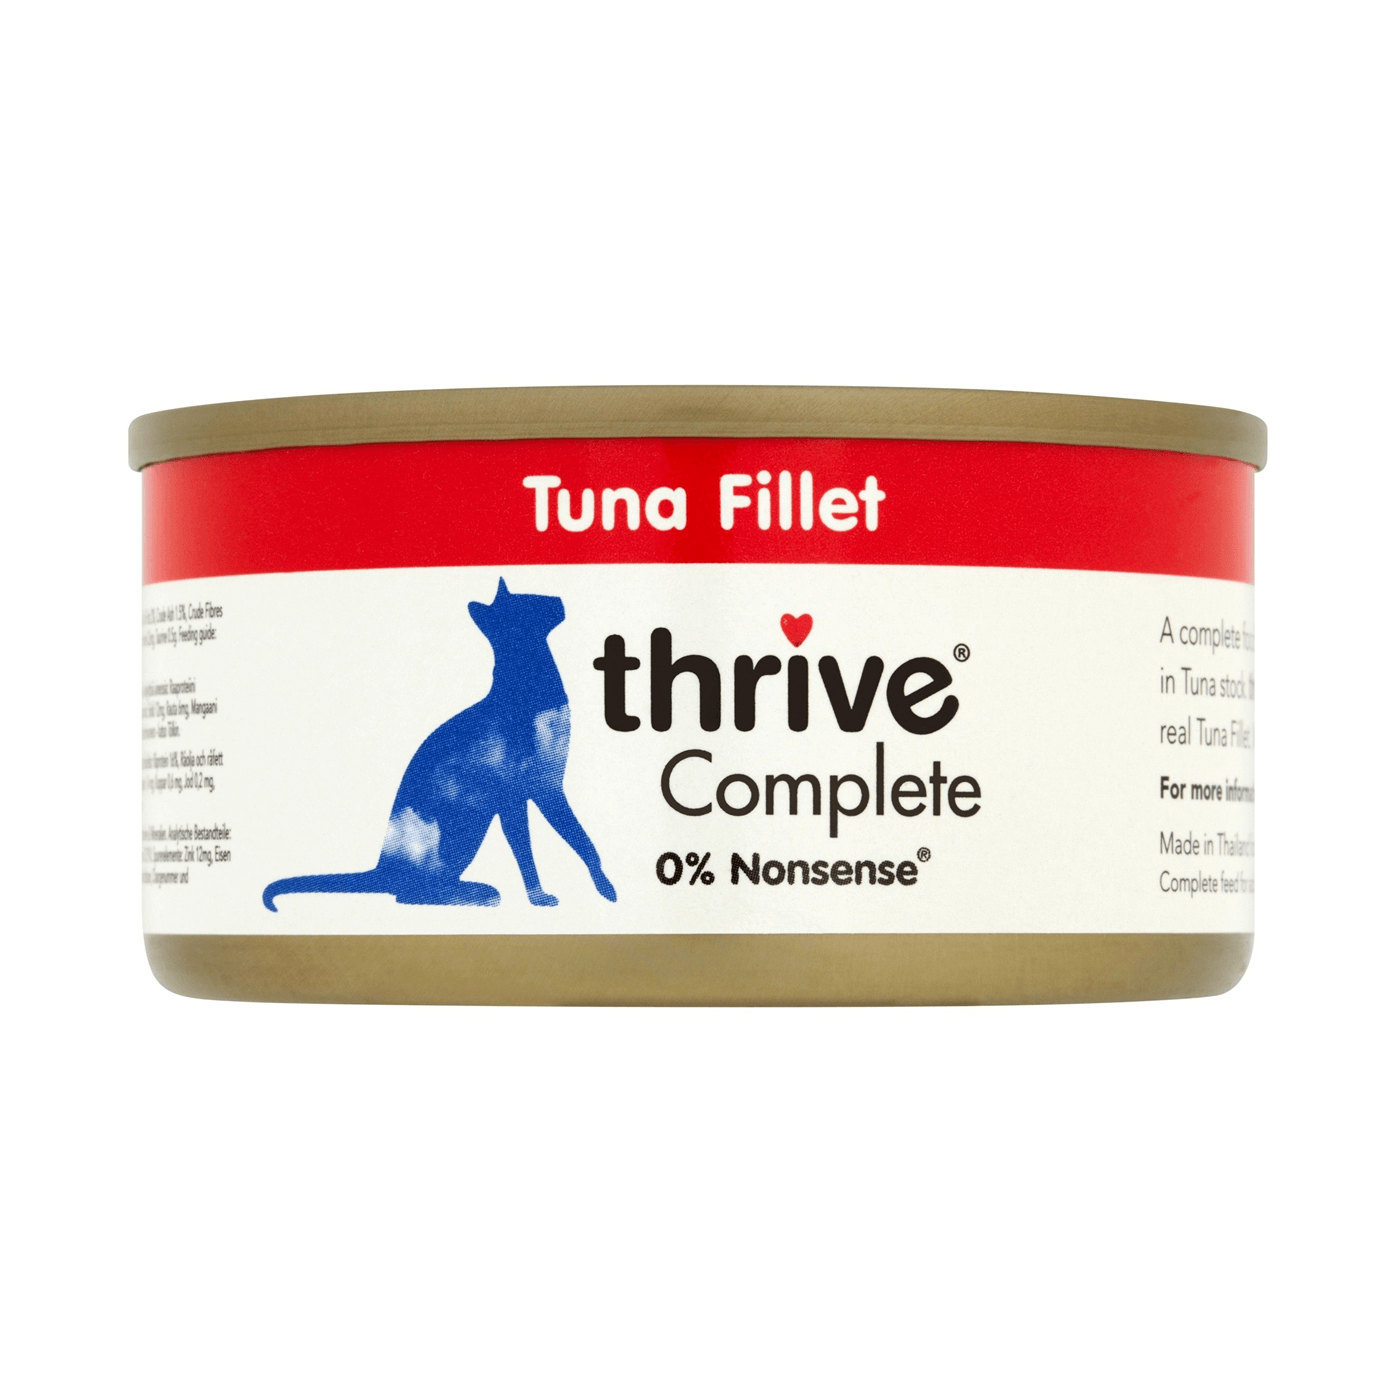 Thrive Complete Tuna Fillet Cat Food 75g